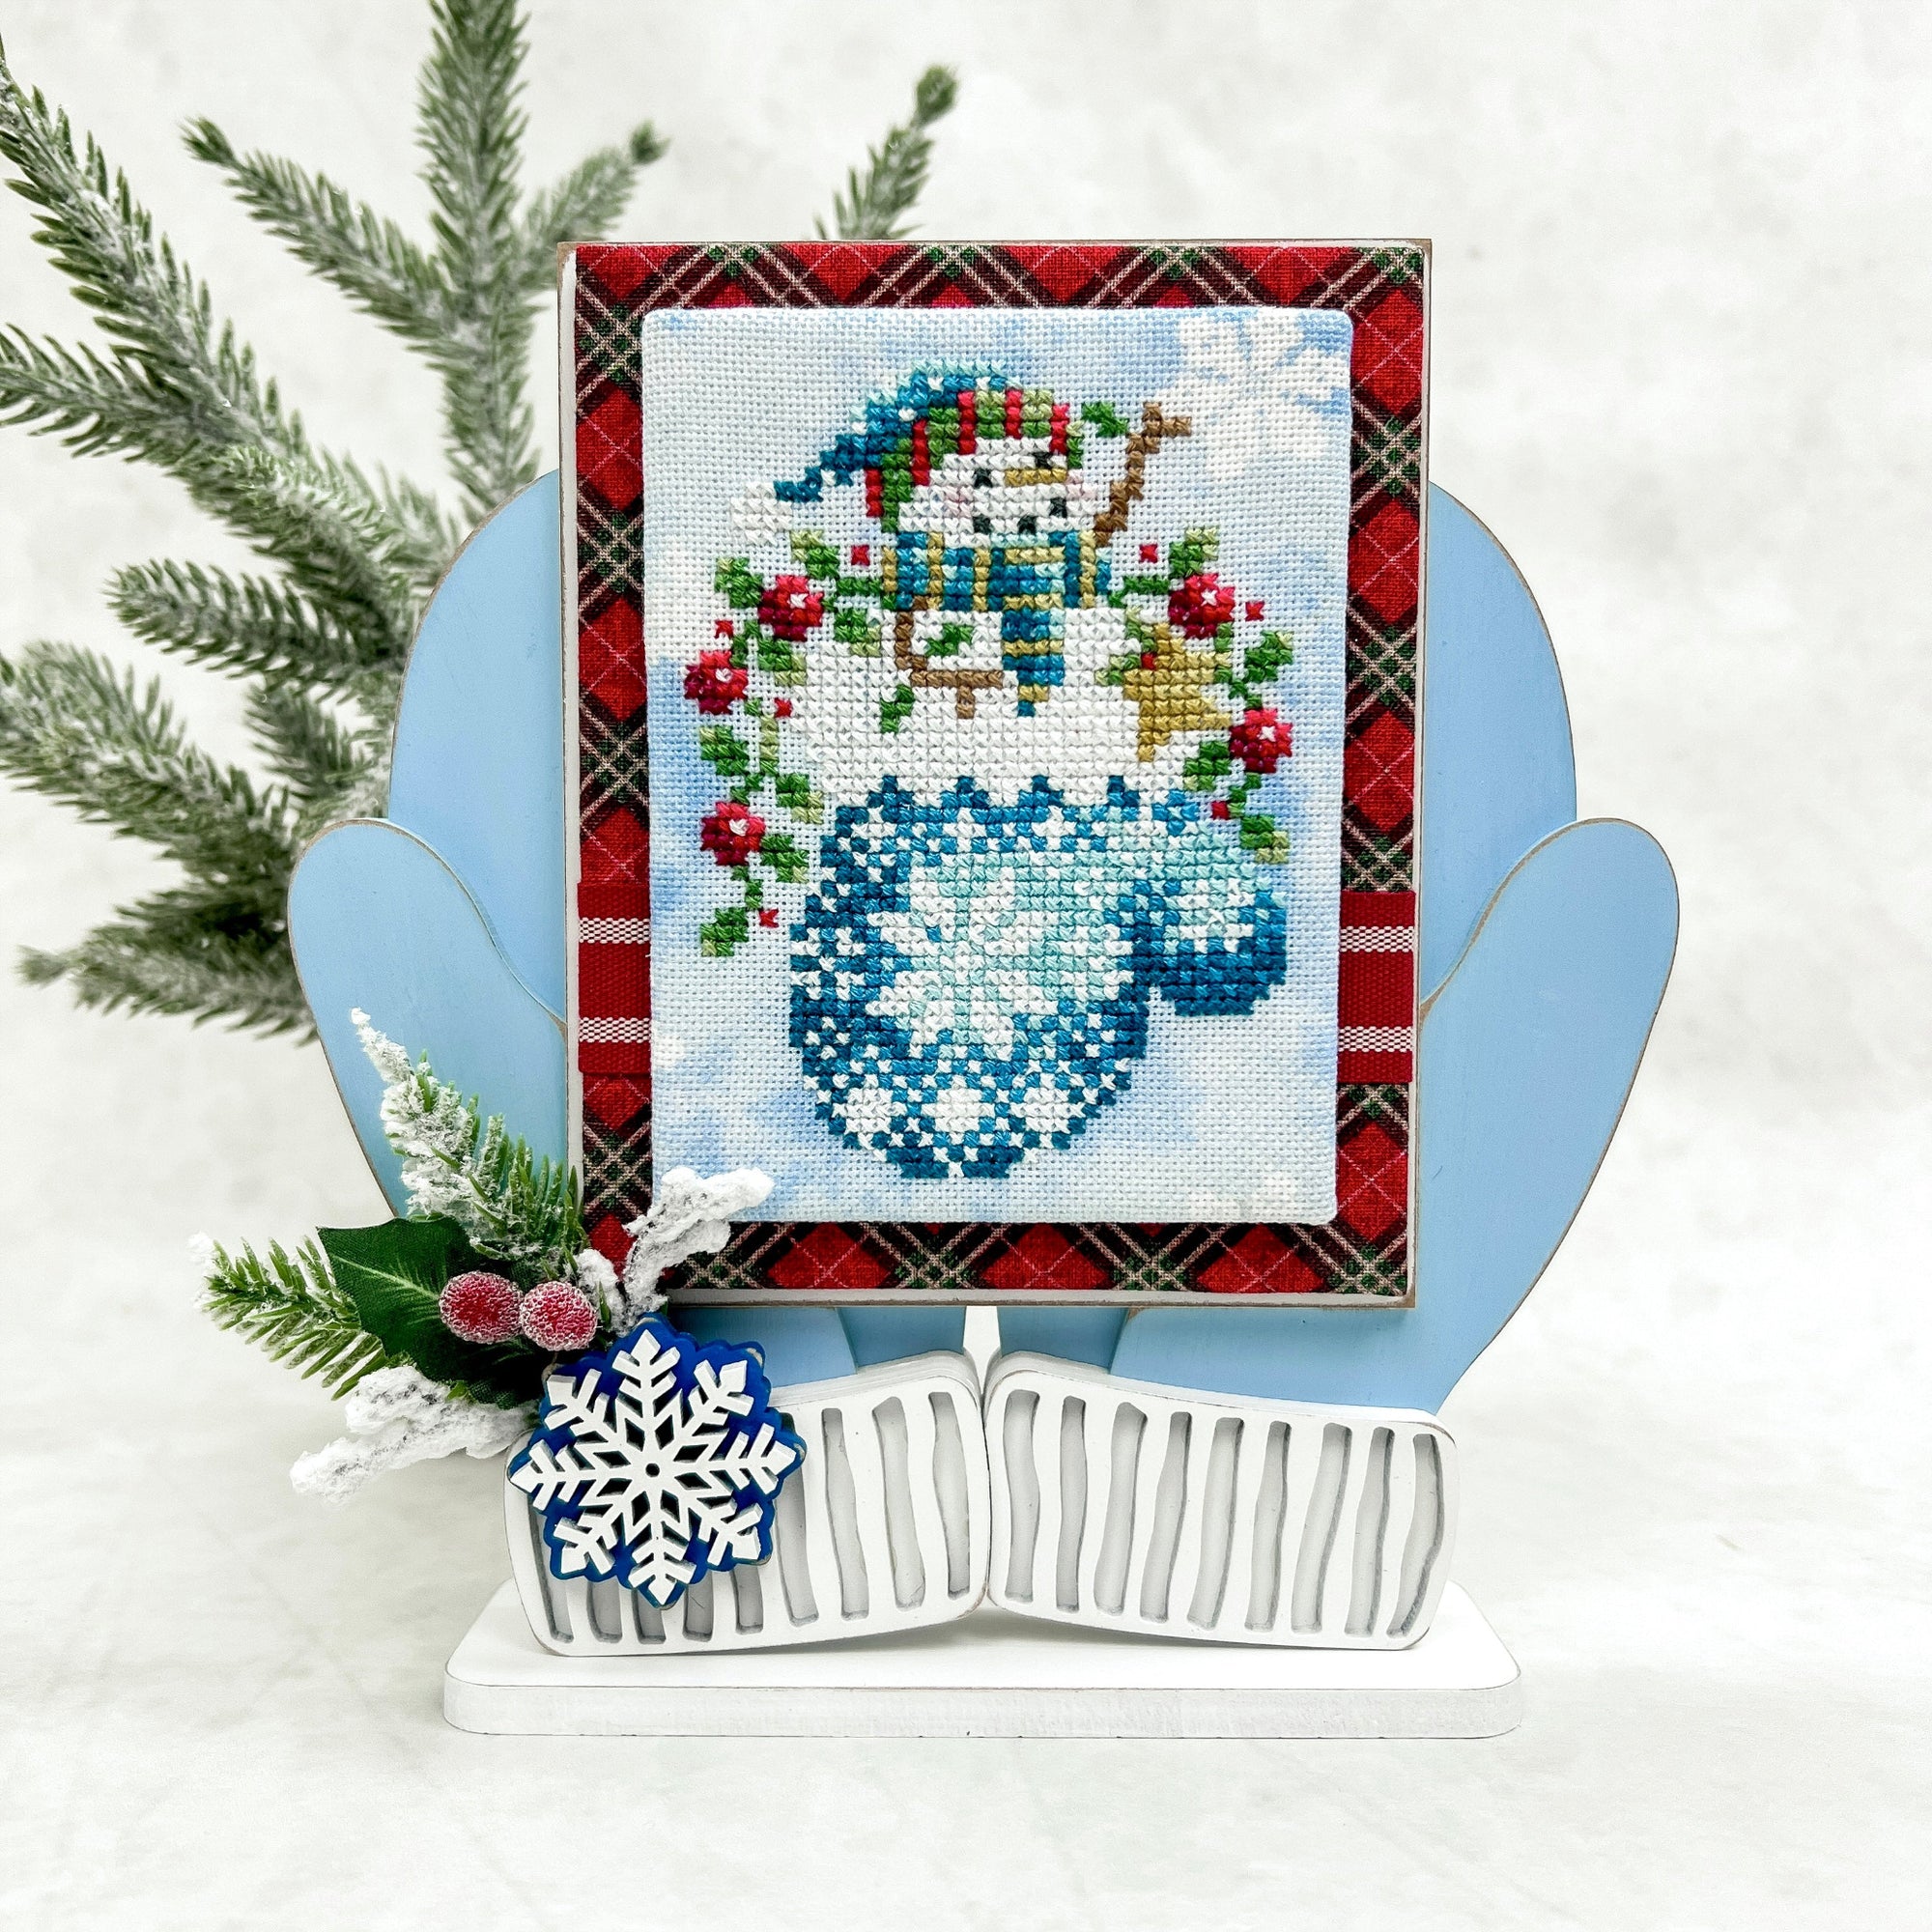 Blue cozy mittens wood cross stitch display with snowman cross stitch by Shannon Christine Designs